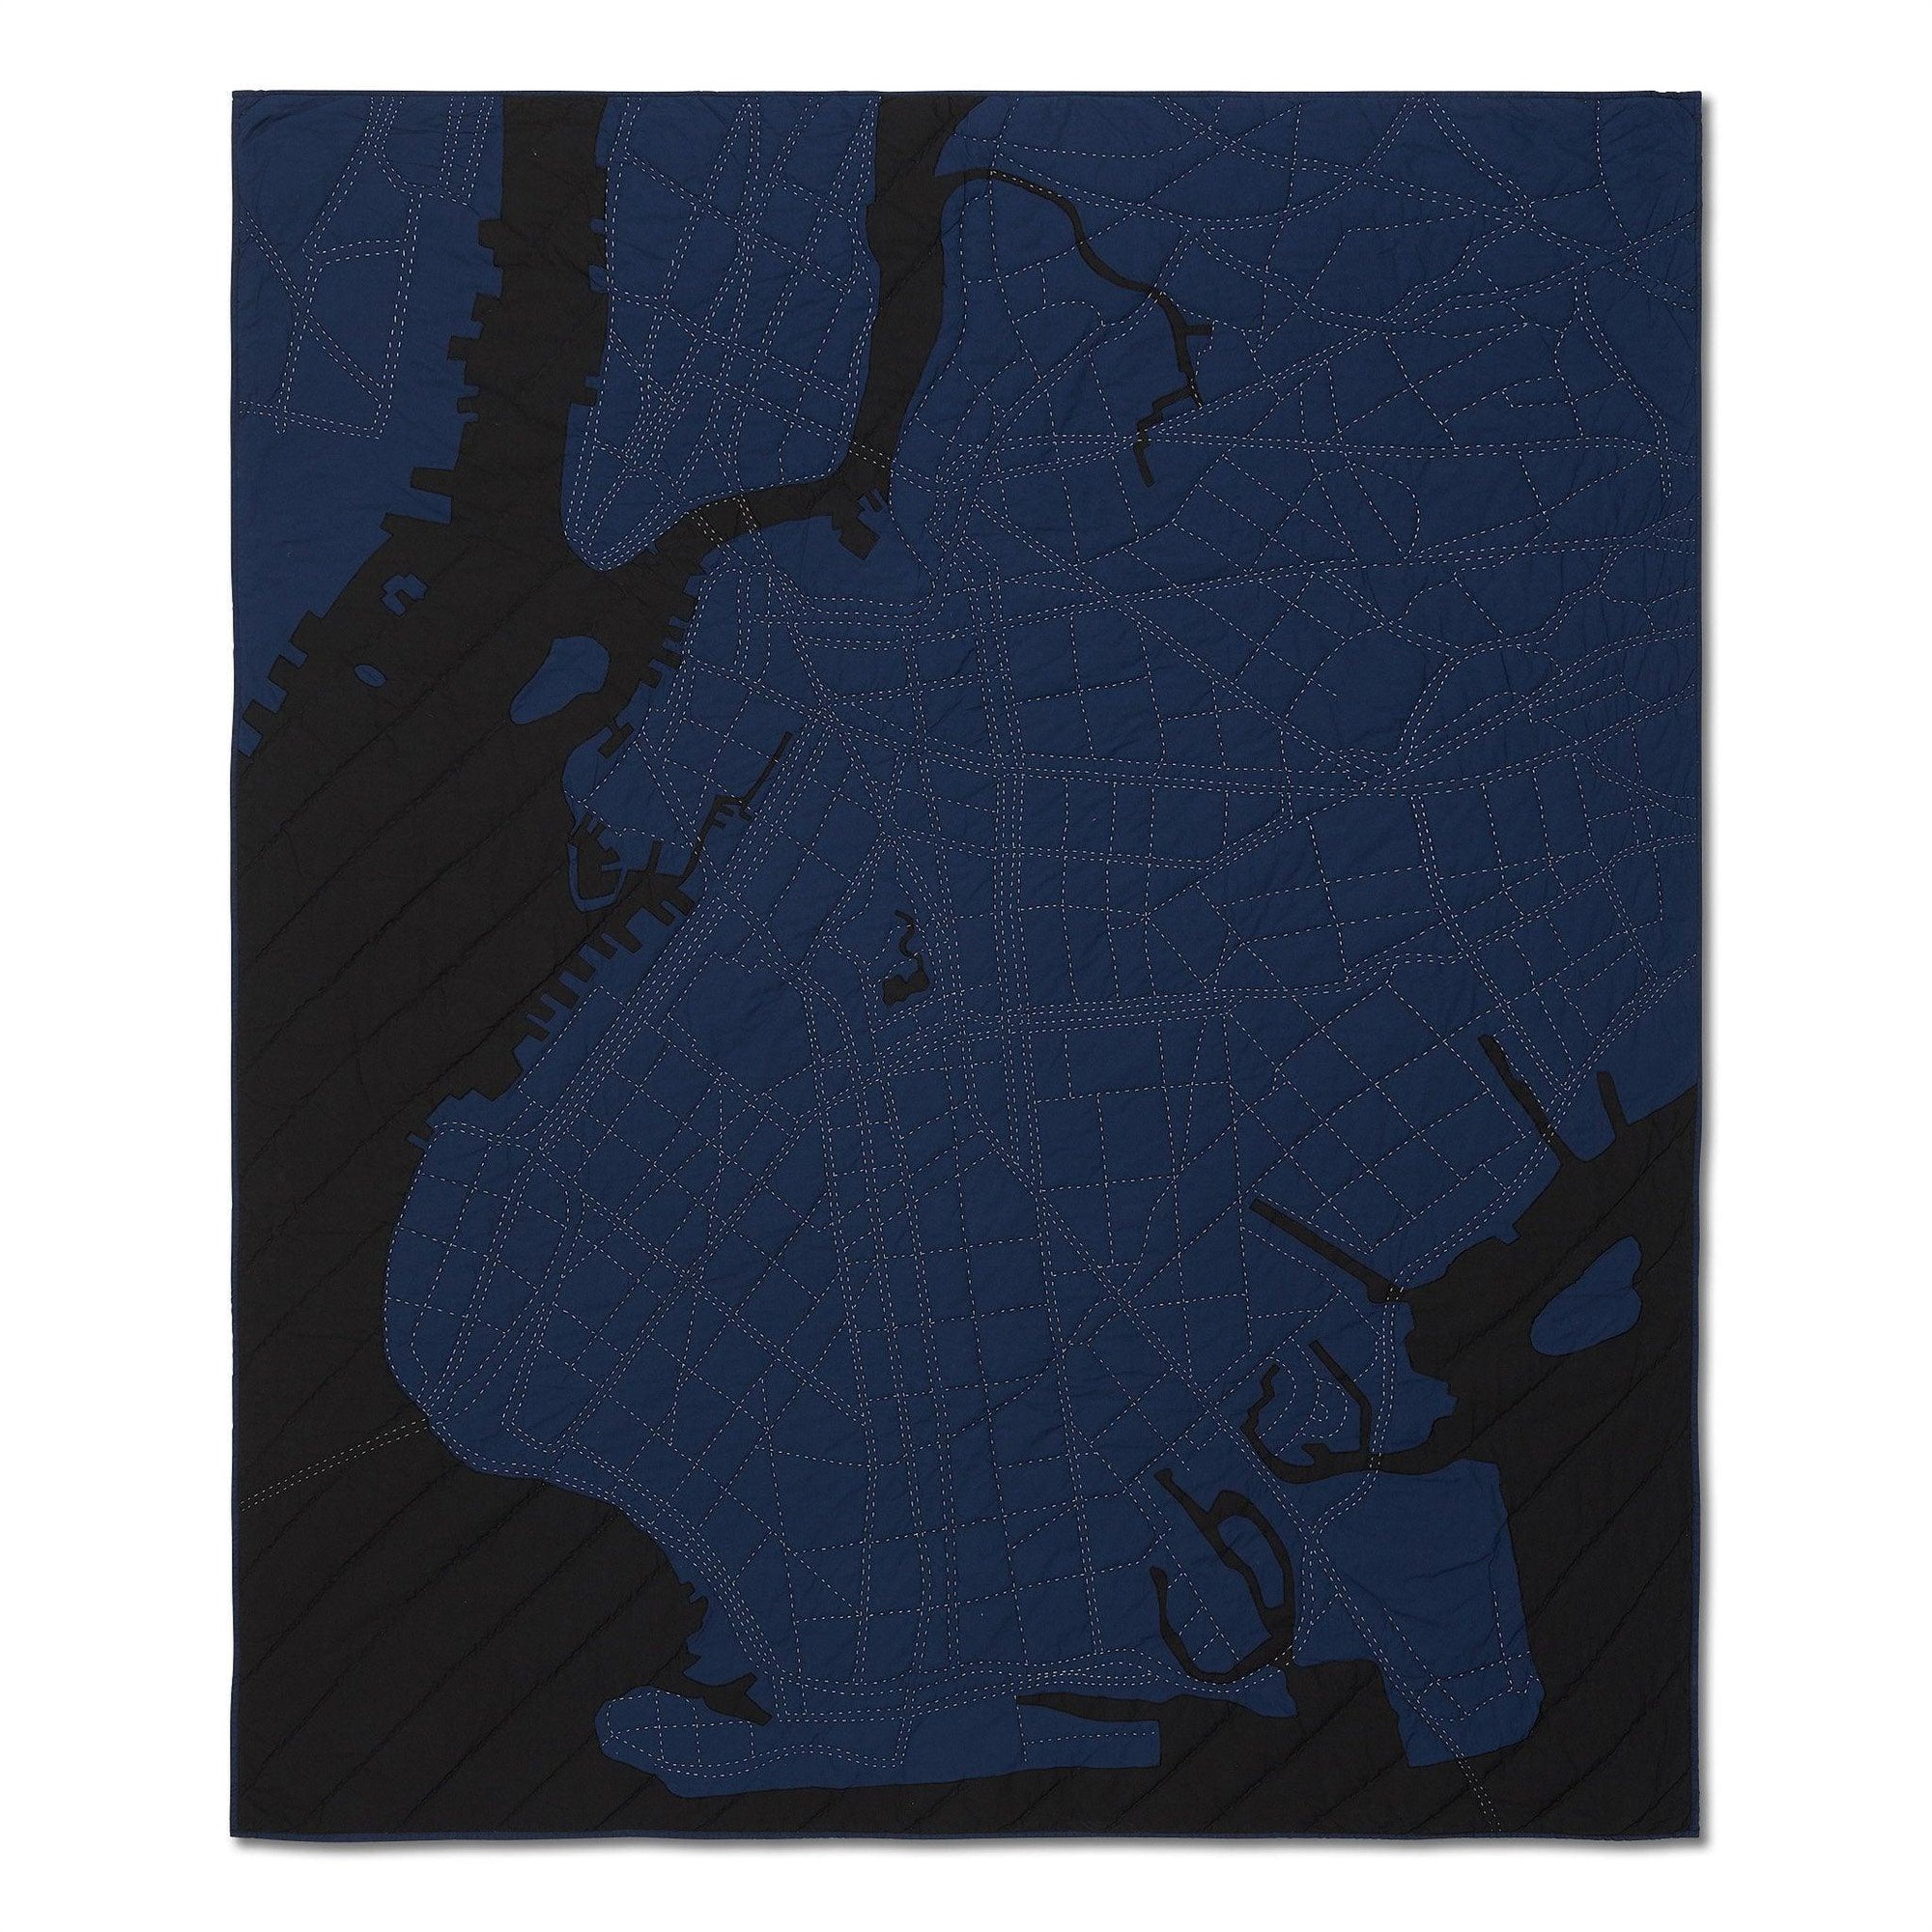 Heirloom Brooklyn map quilt, hand-stitched with dark blue cotton fabrics..